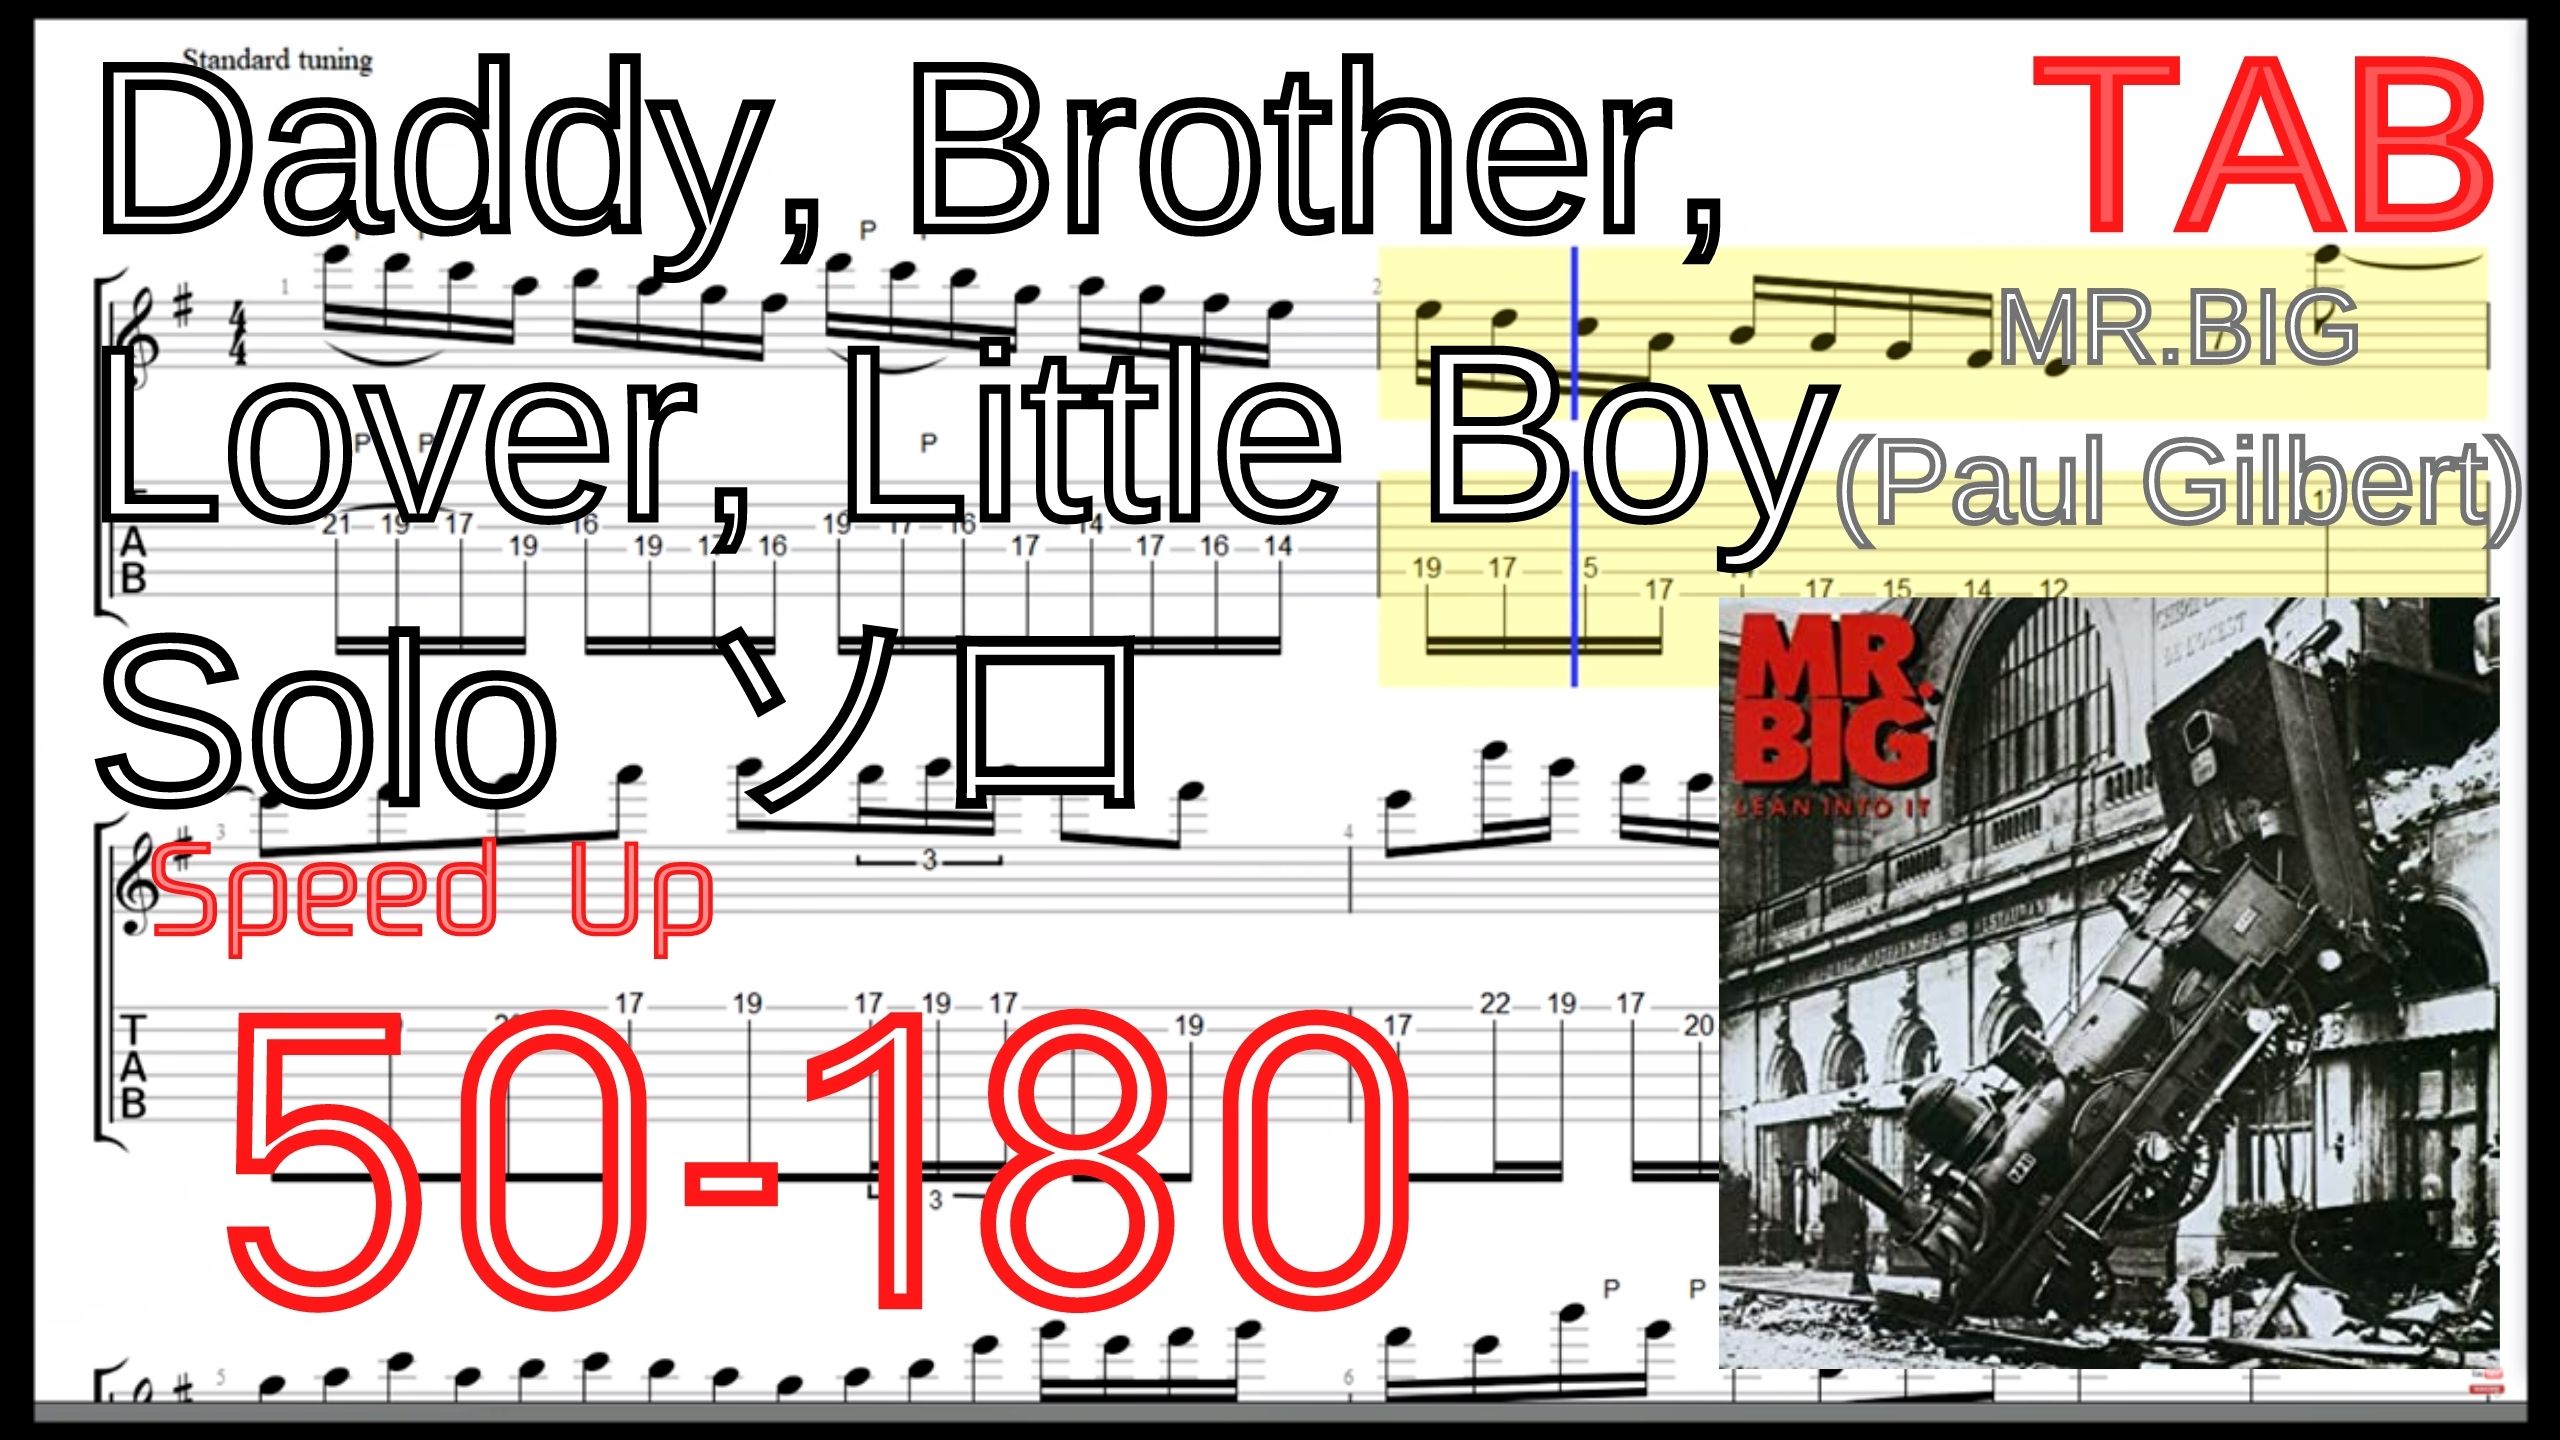 【TAB】Daddy, Brother, Lover, Little Boy[solo] / Mr.Big(Paul Gilbert) Guitar Practice ポール･ギルバート ピッキング練習【Guitar Picking】